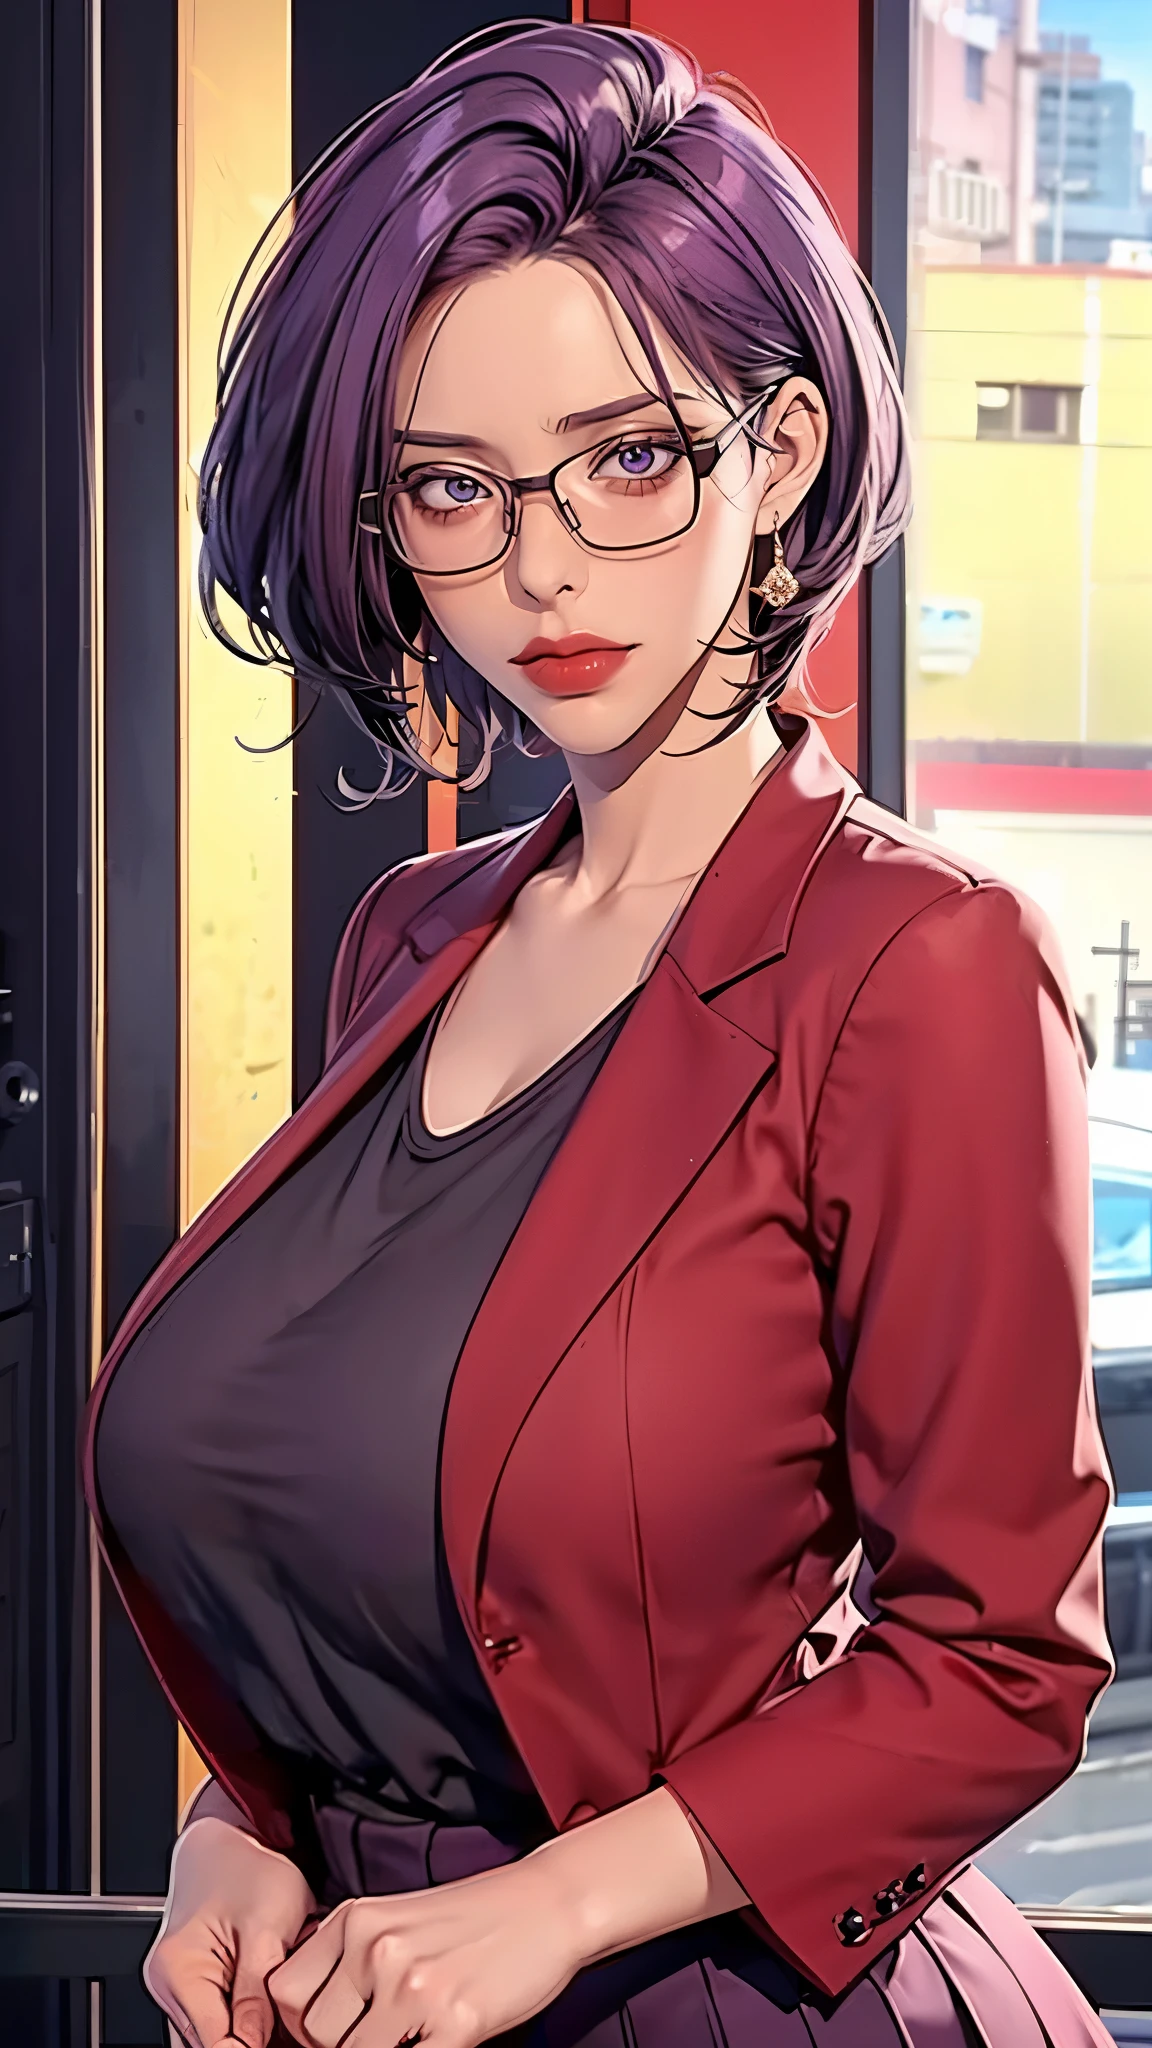 （（（Perfect figure，figure，Red blazer， gray shirt，hip-covering skirt（（（JMT,Glasses,purple hair,short hair,purple eyes,MiJungdef，purple eyes，purple hair，medium hair，）））型figure:1.7））），((masterpiece)),high resolution, ((Best quality at best))，masterpiece，quality，Best quality，（（（ Exquisite facial features，looking at the audience,There is light in the eyes，Happy，nterlacing of light and shadow，huge boobs））），（（（looking into camera，)）））